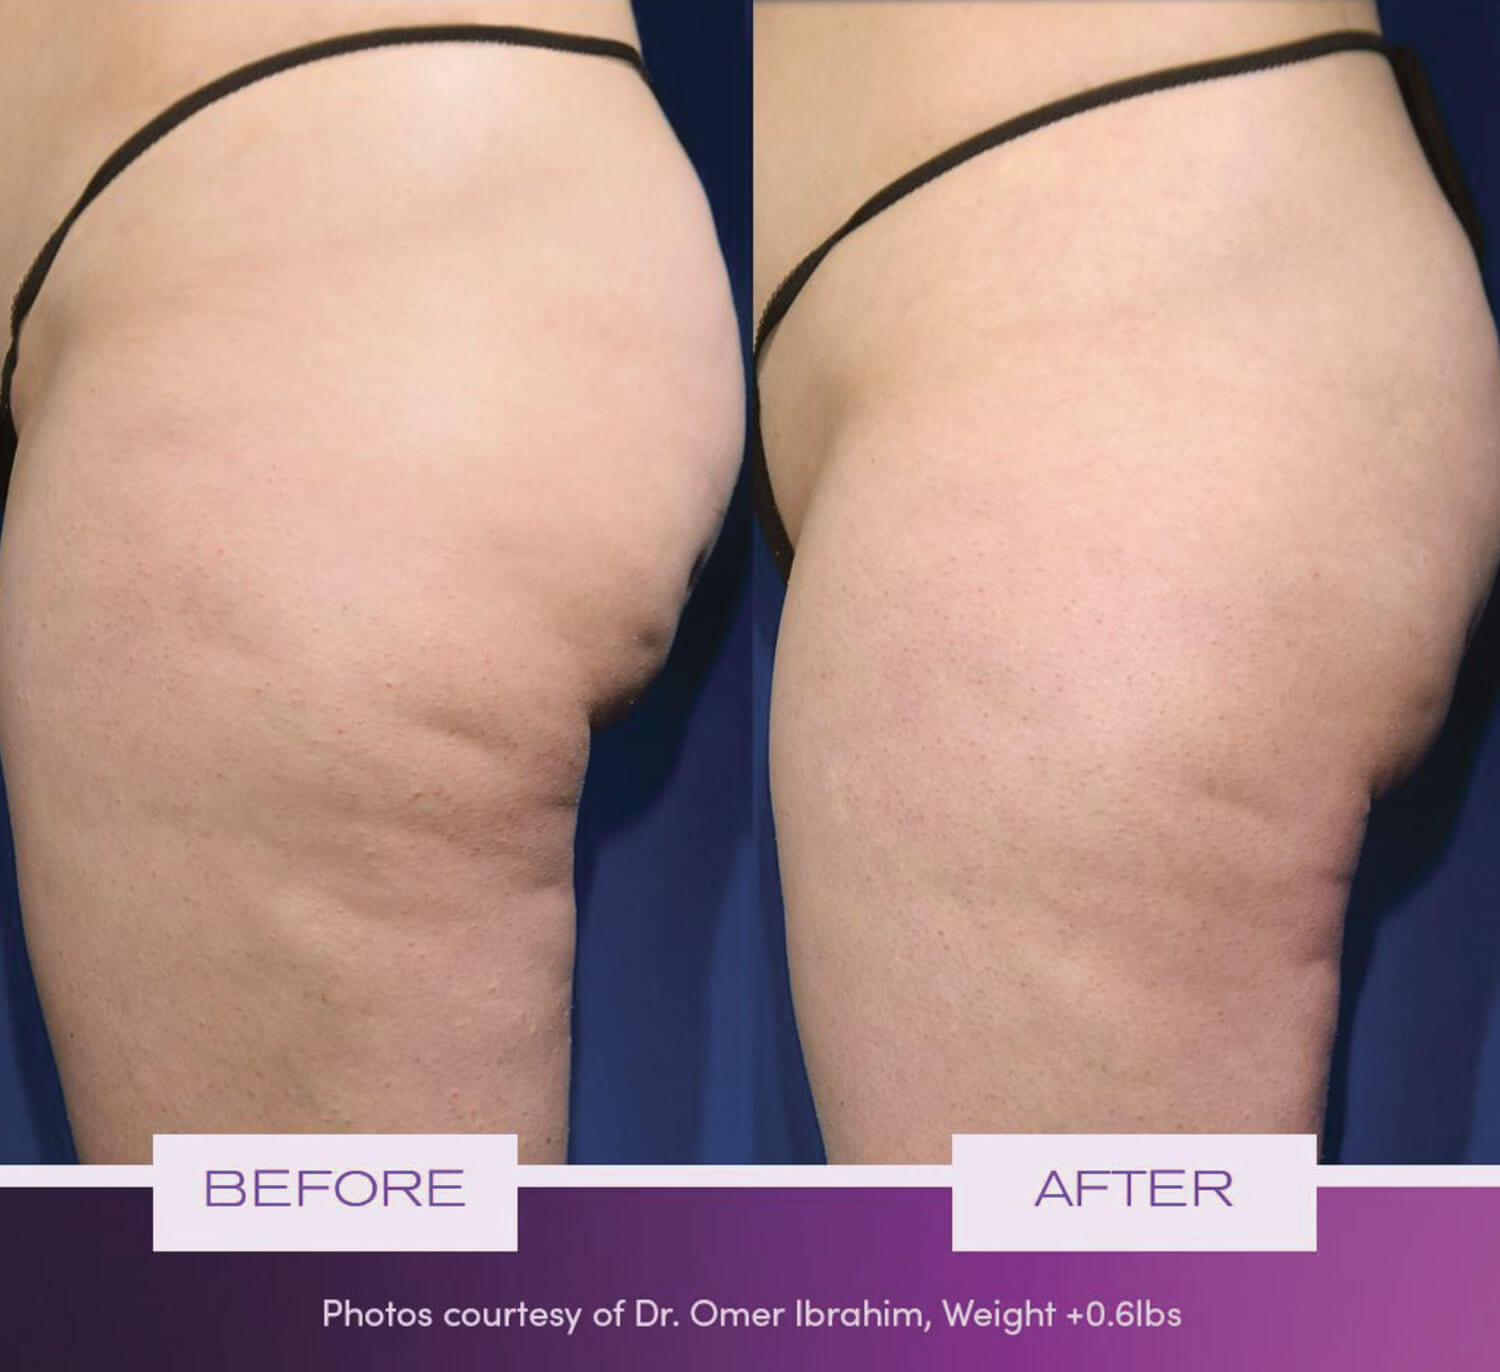 Cellulite therapy in 2022 – new treatment options making grades